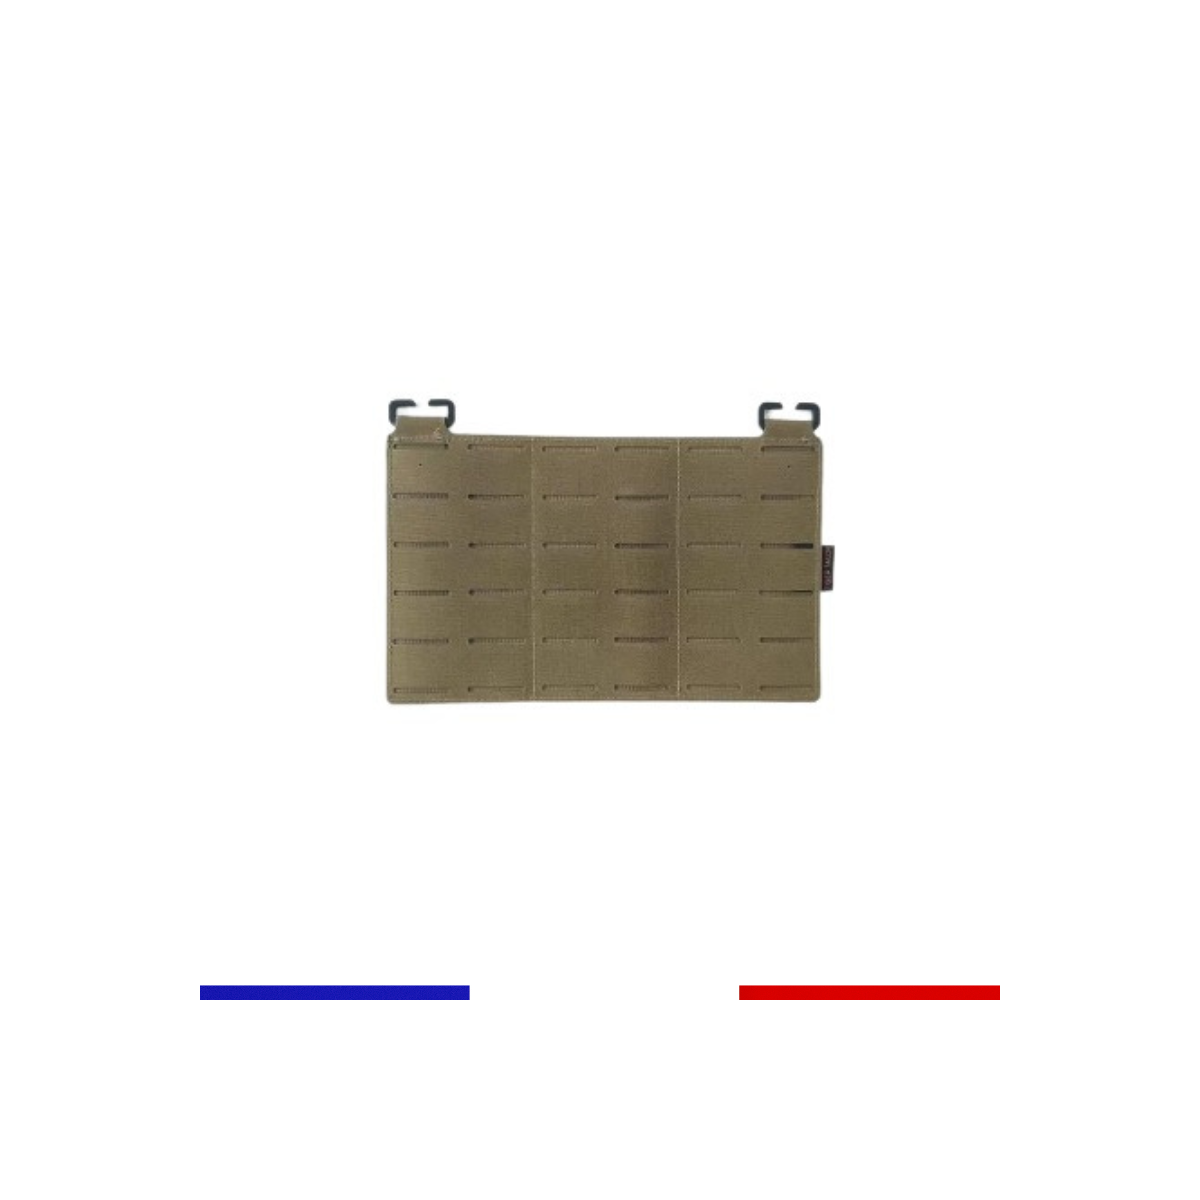 Modular panel for plate carriers